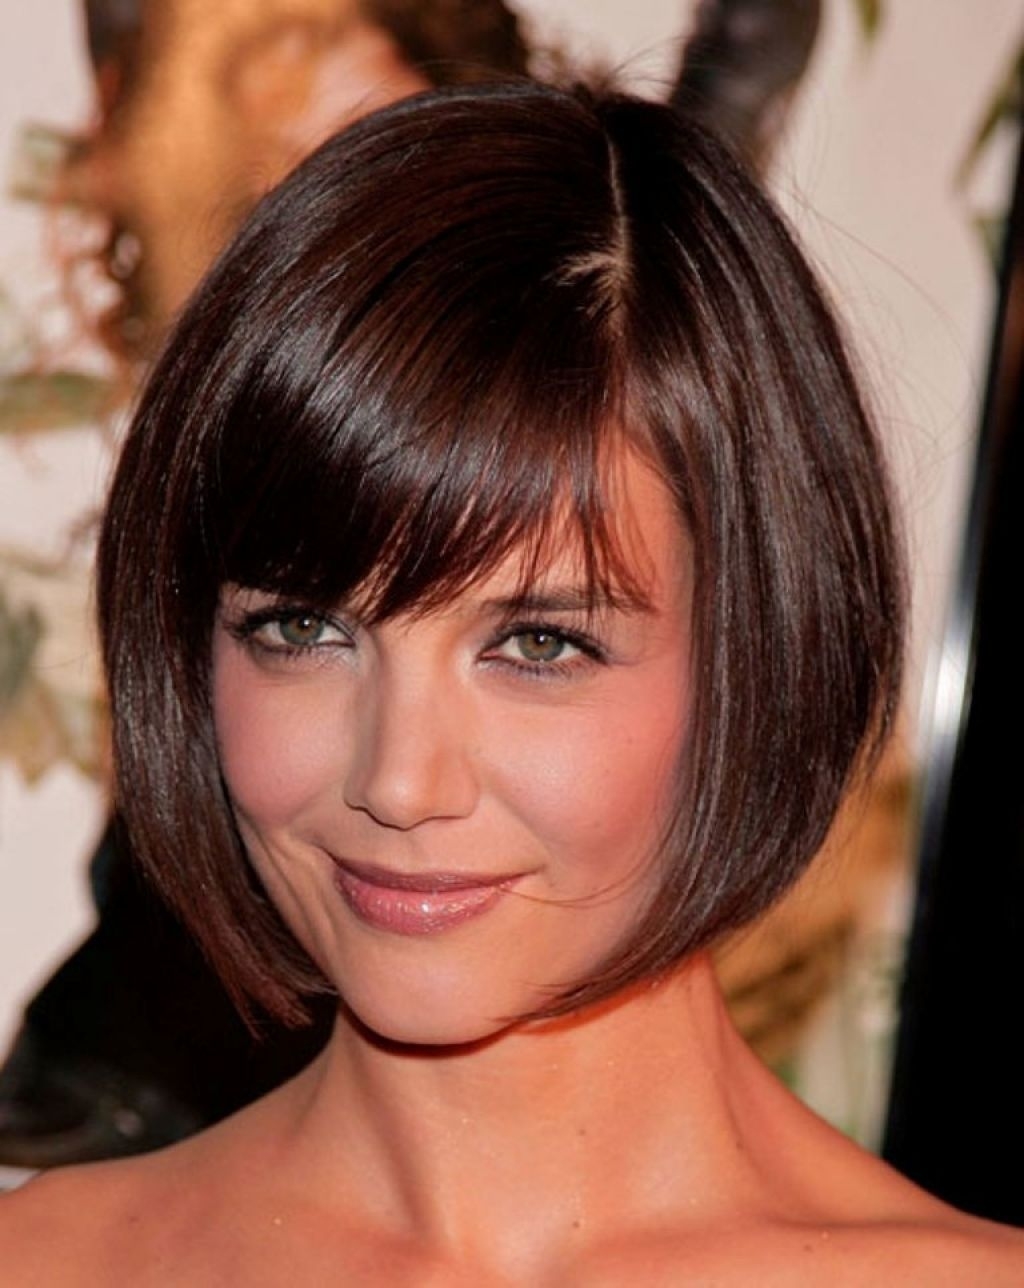 Short Hairstyles For Thick Hair Square Face | Hair!! | Pinterest pertaining to Short Haircut For Square Face Thick Hair